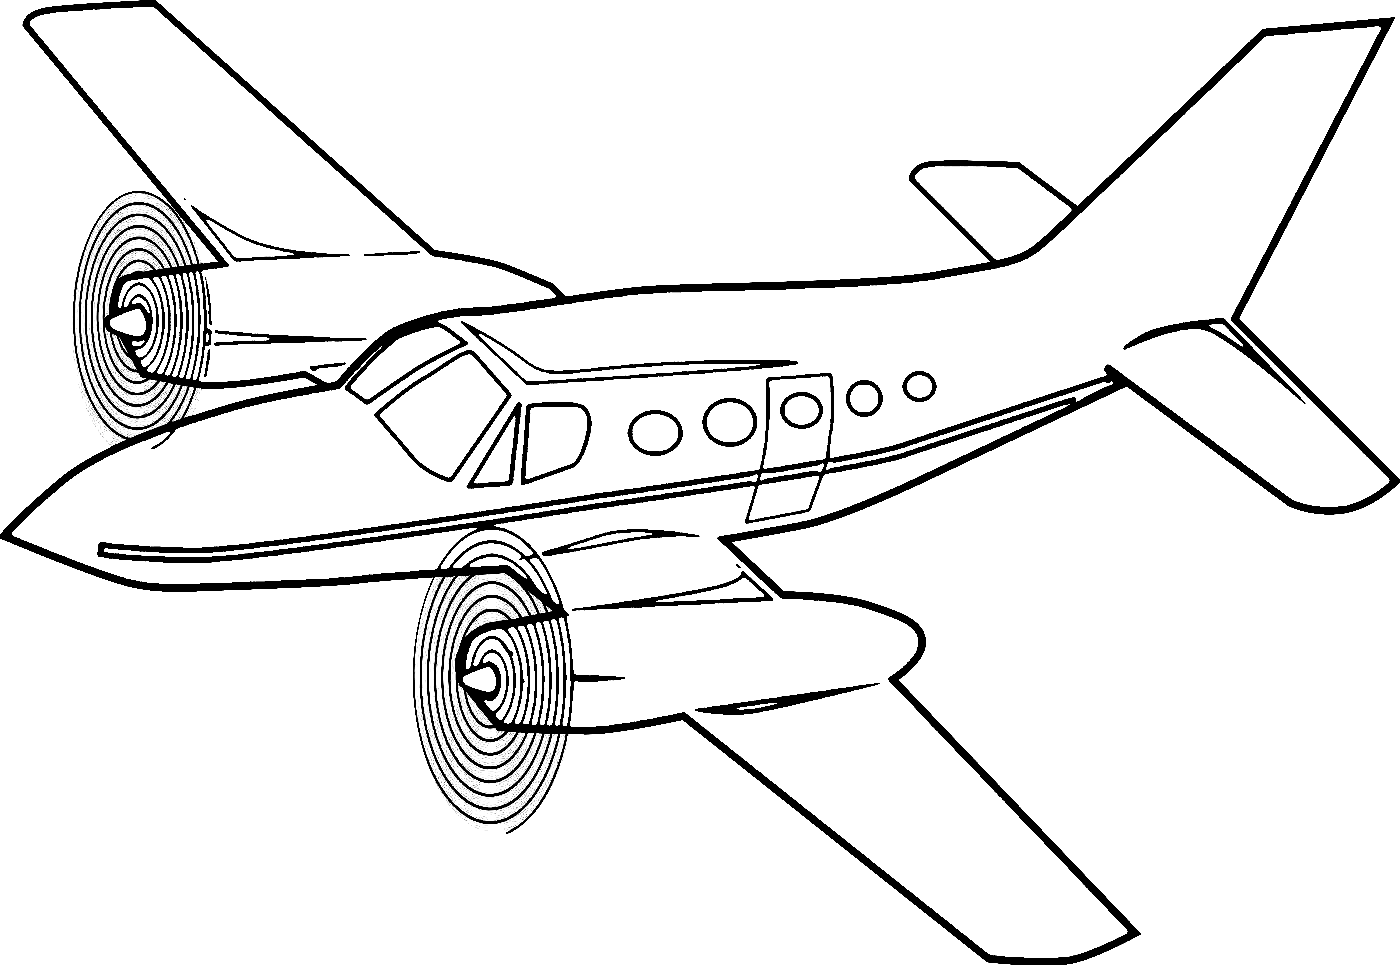 Airplane to Download Coloring Pages   Airplane Coloring Pages ...